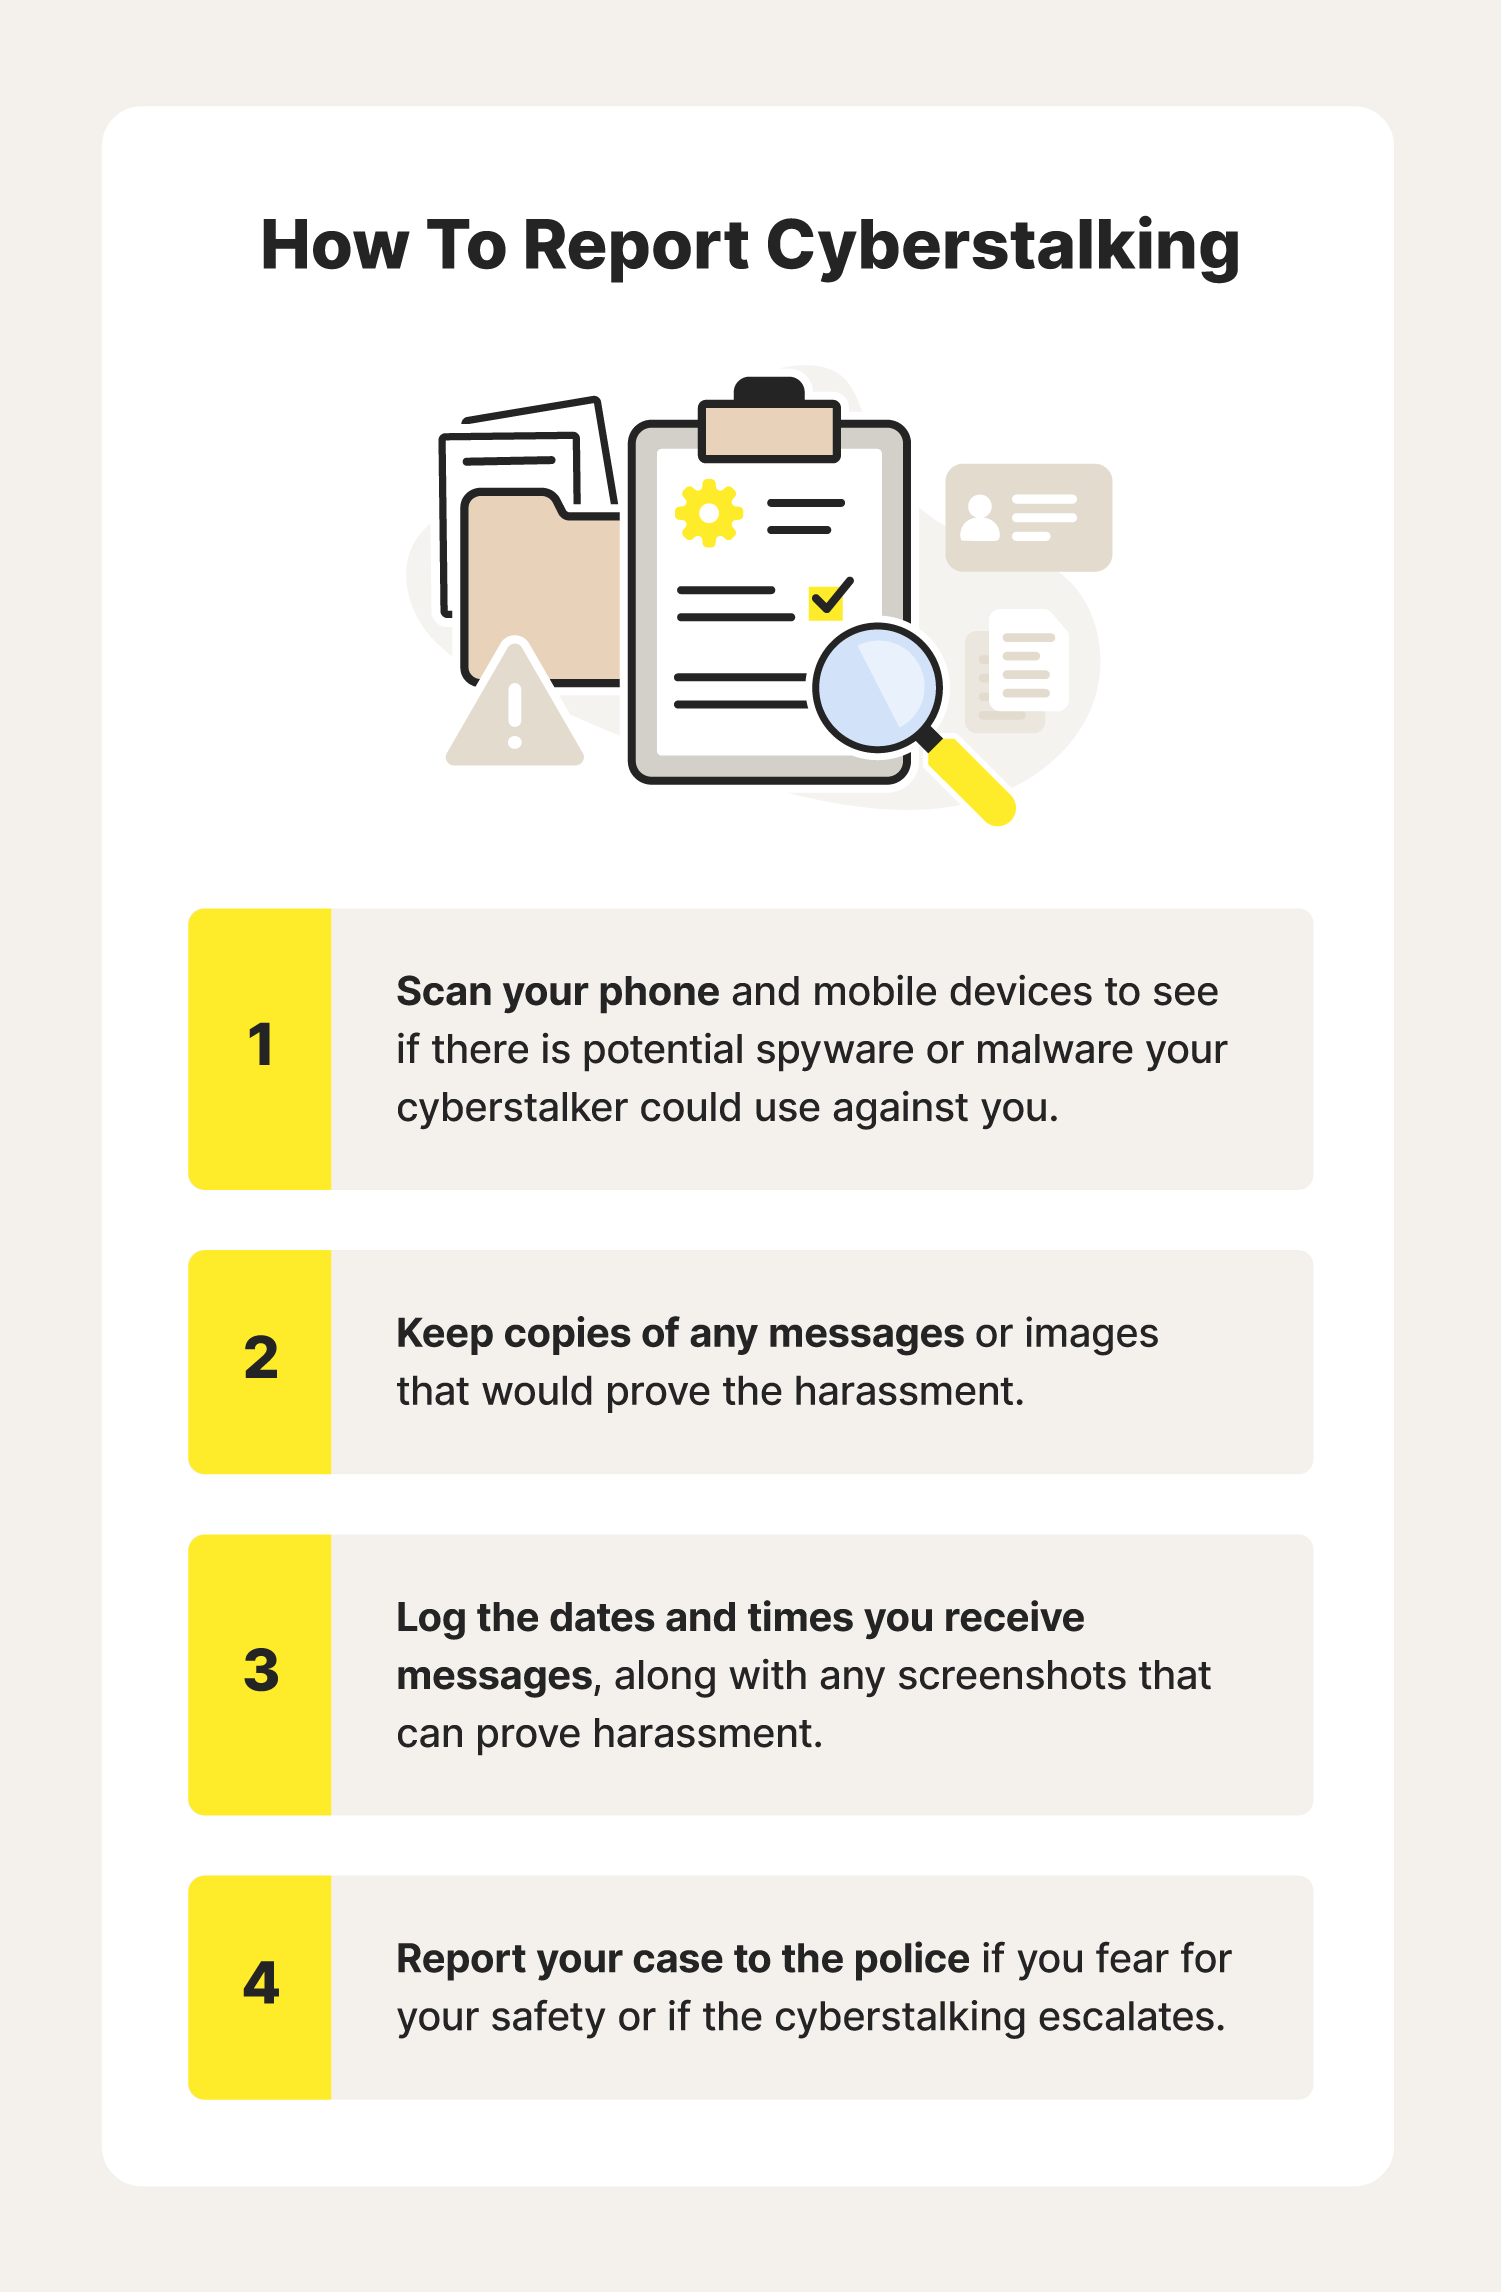 An illustration of a checklist represents the four steps of reporting cyberstalking.